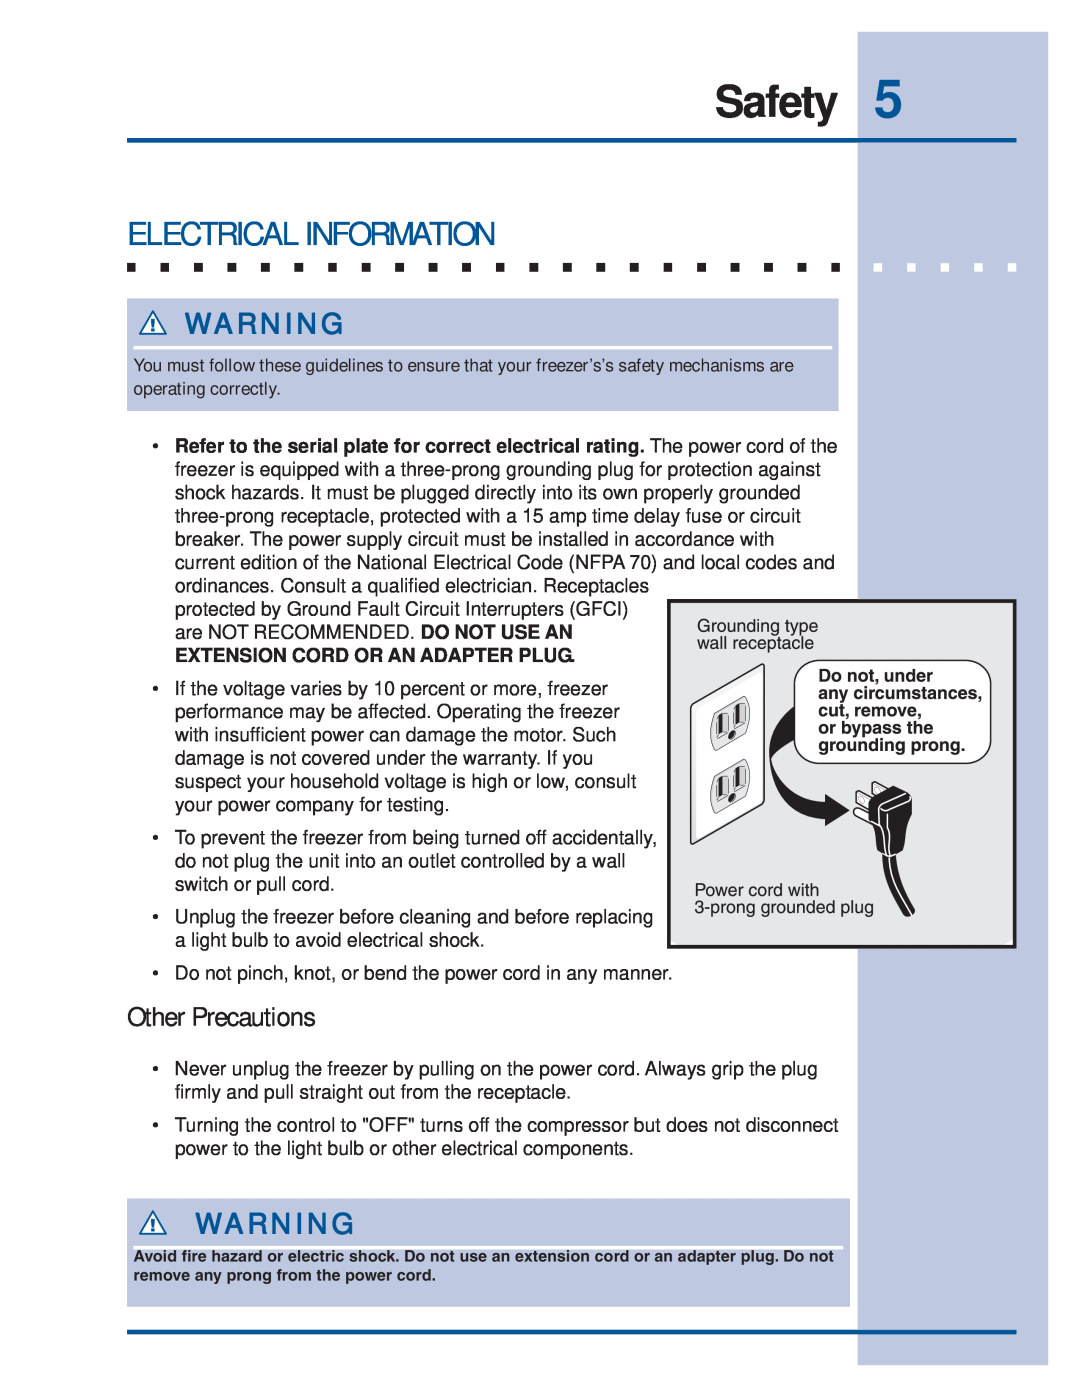 Electrolux Refrigerator manual Other Precautions, Safety, Electrical Information 